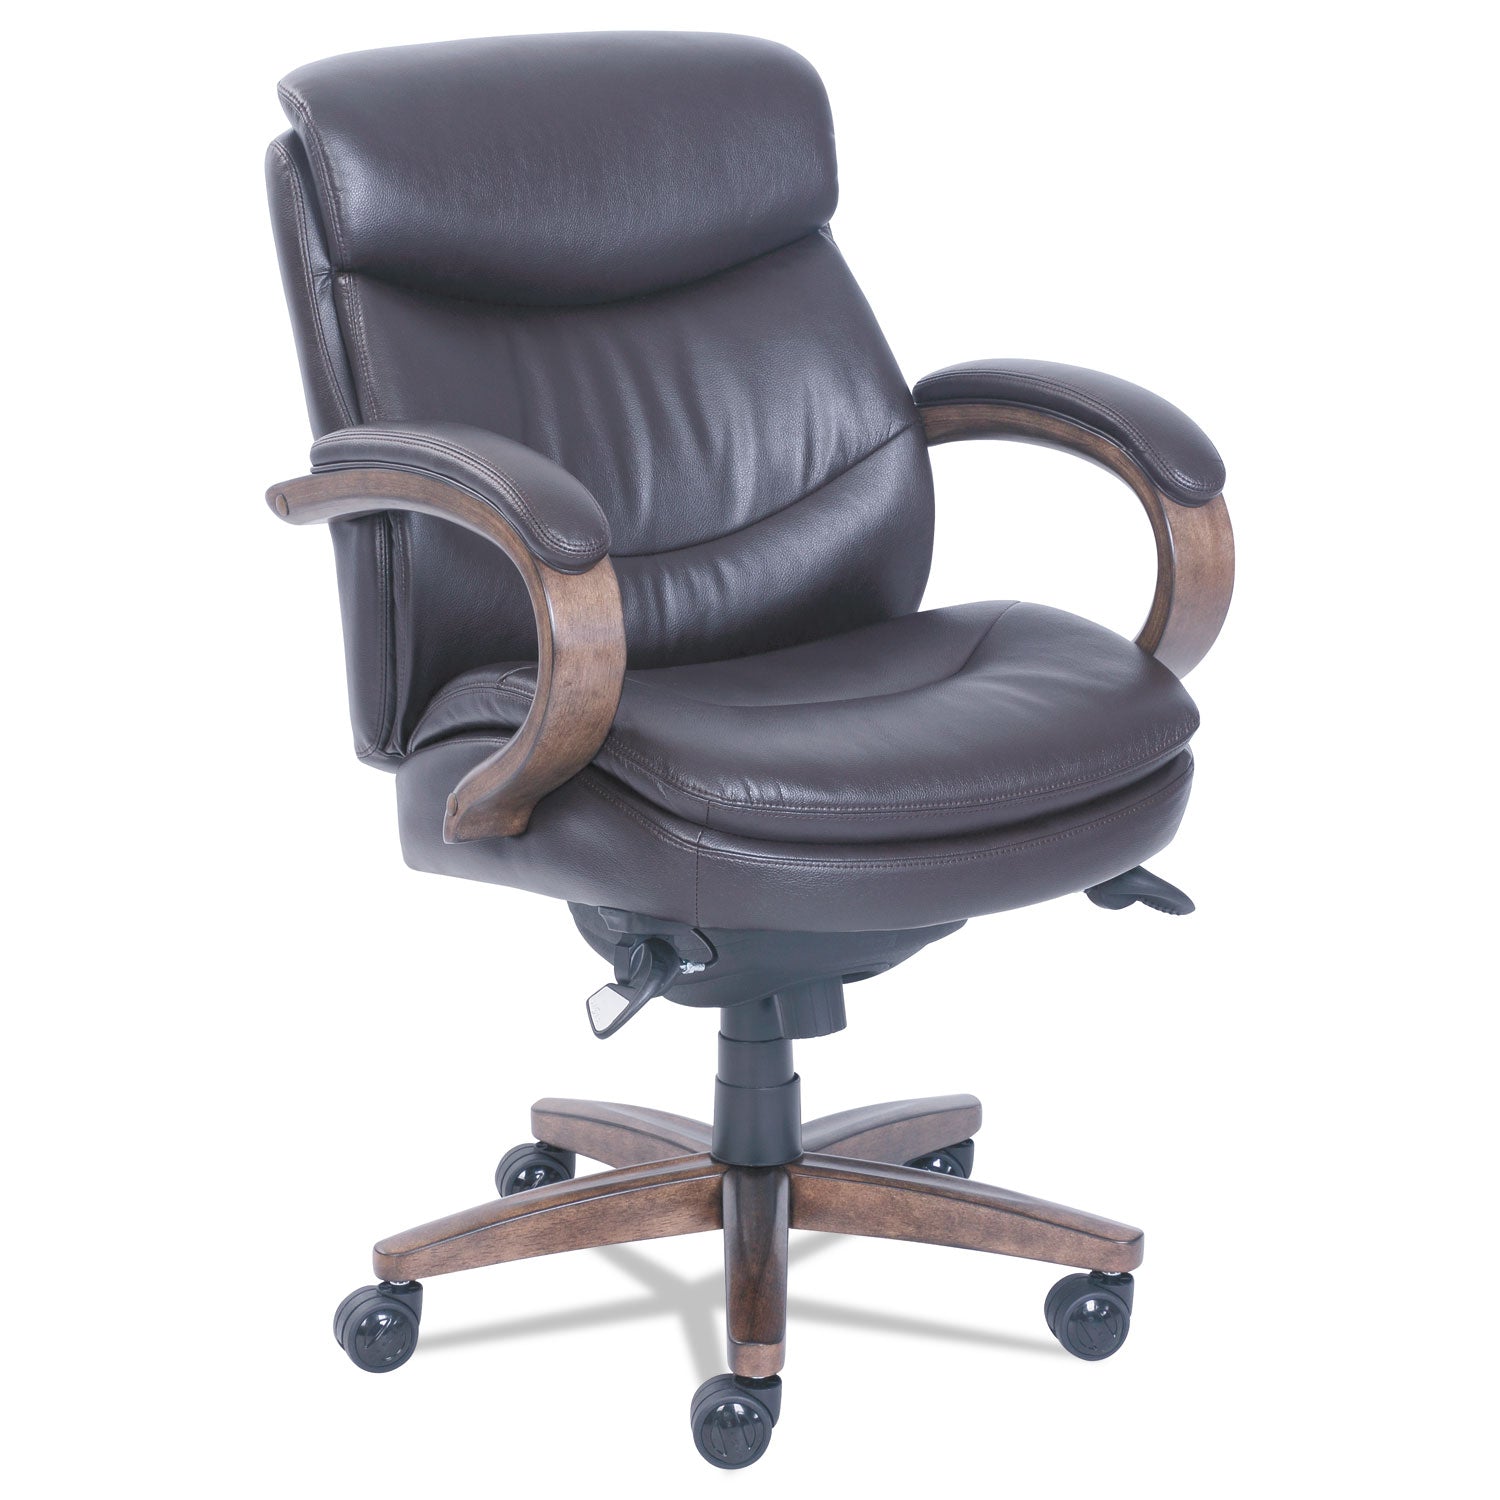 woodbury-mid-back-executive-chair-supports-up-to-300-lb-1875-to-2175-seat-height-brown-seat-back-weathered-sand-base_lzb48963b - 1